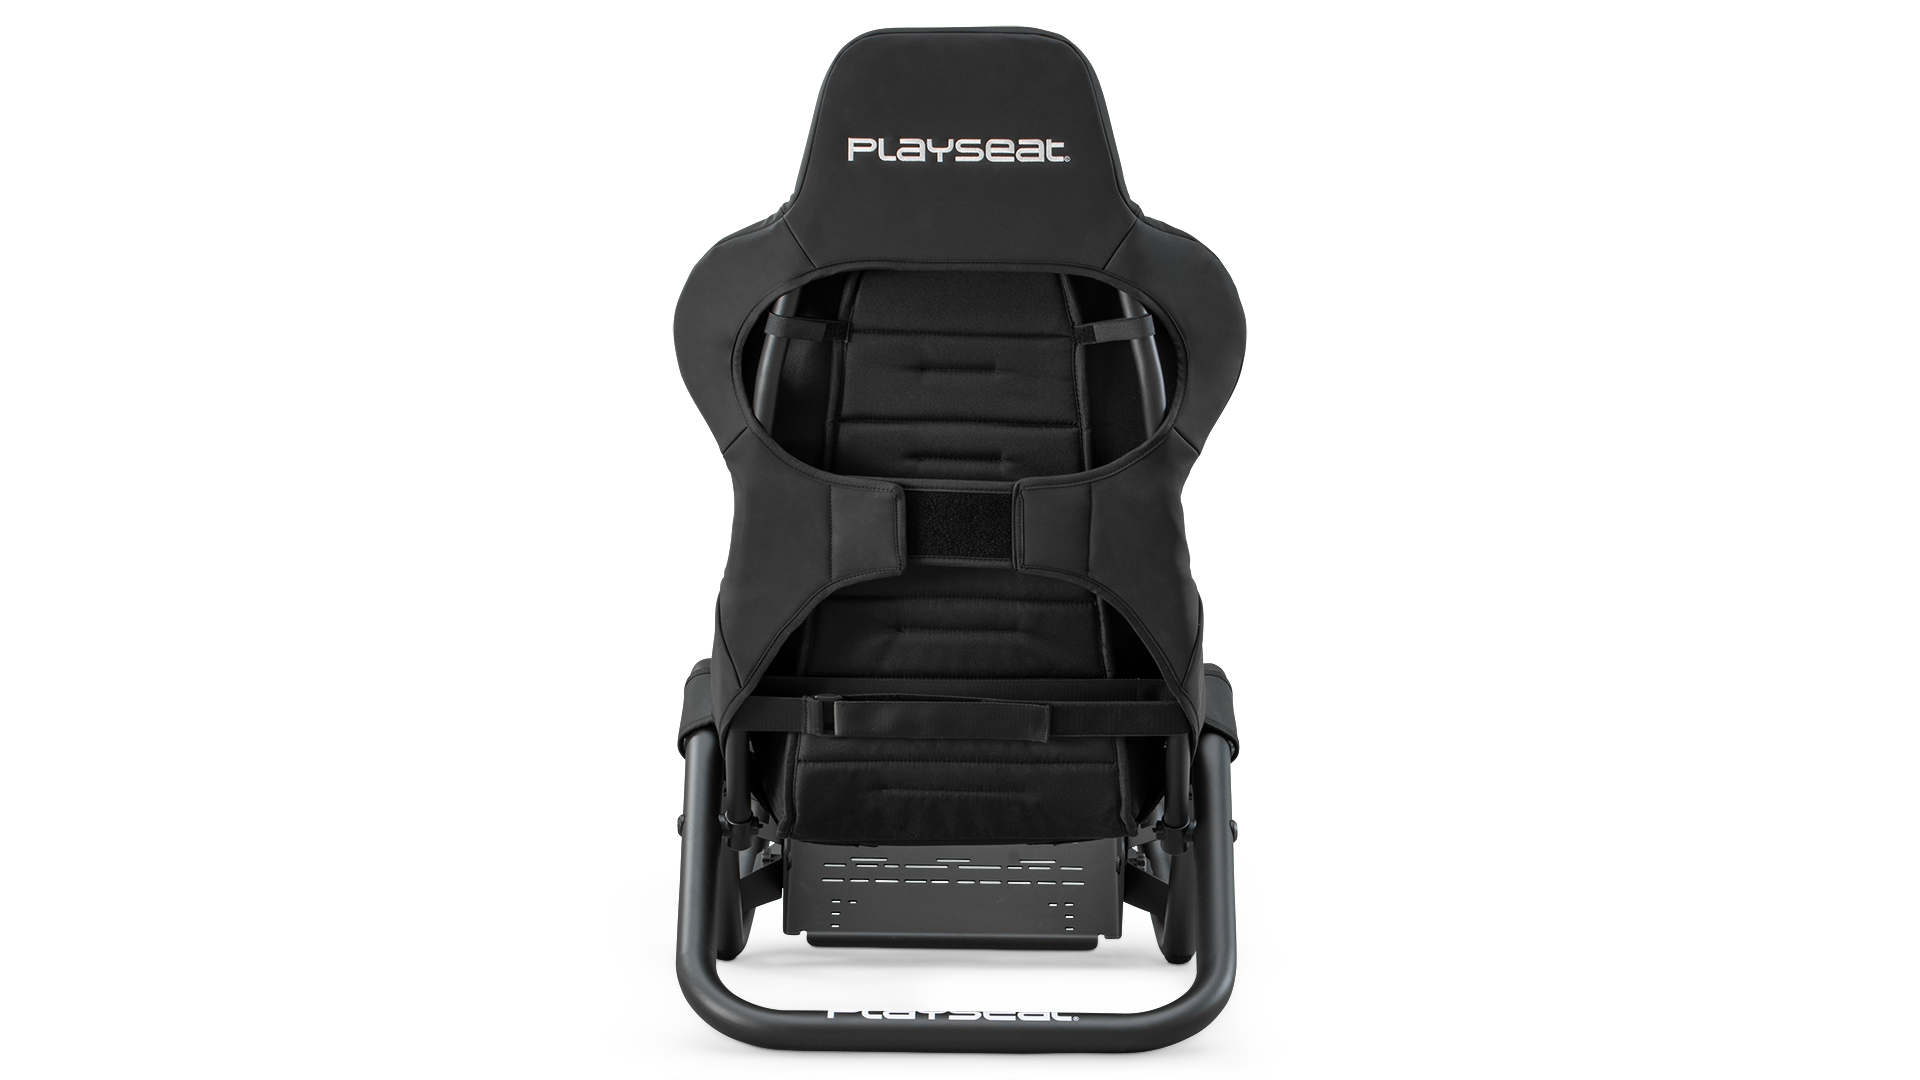 playseat-trophy-black-direct-drive-simulator-back-view-1920x1080-5.png